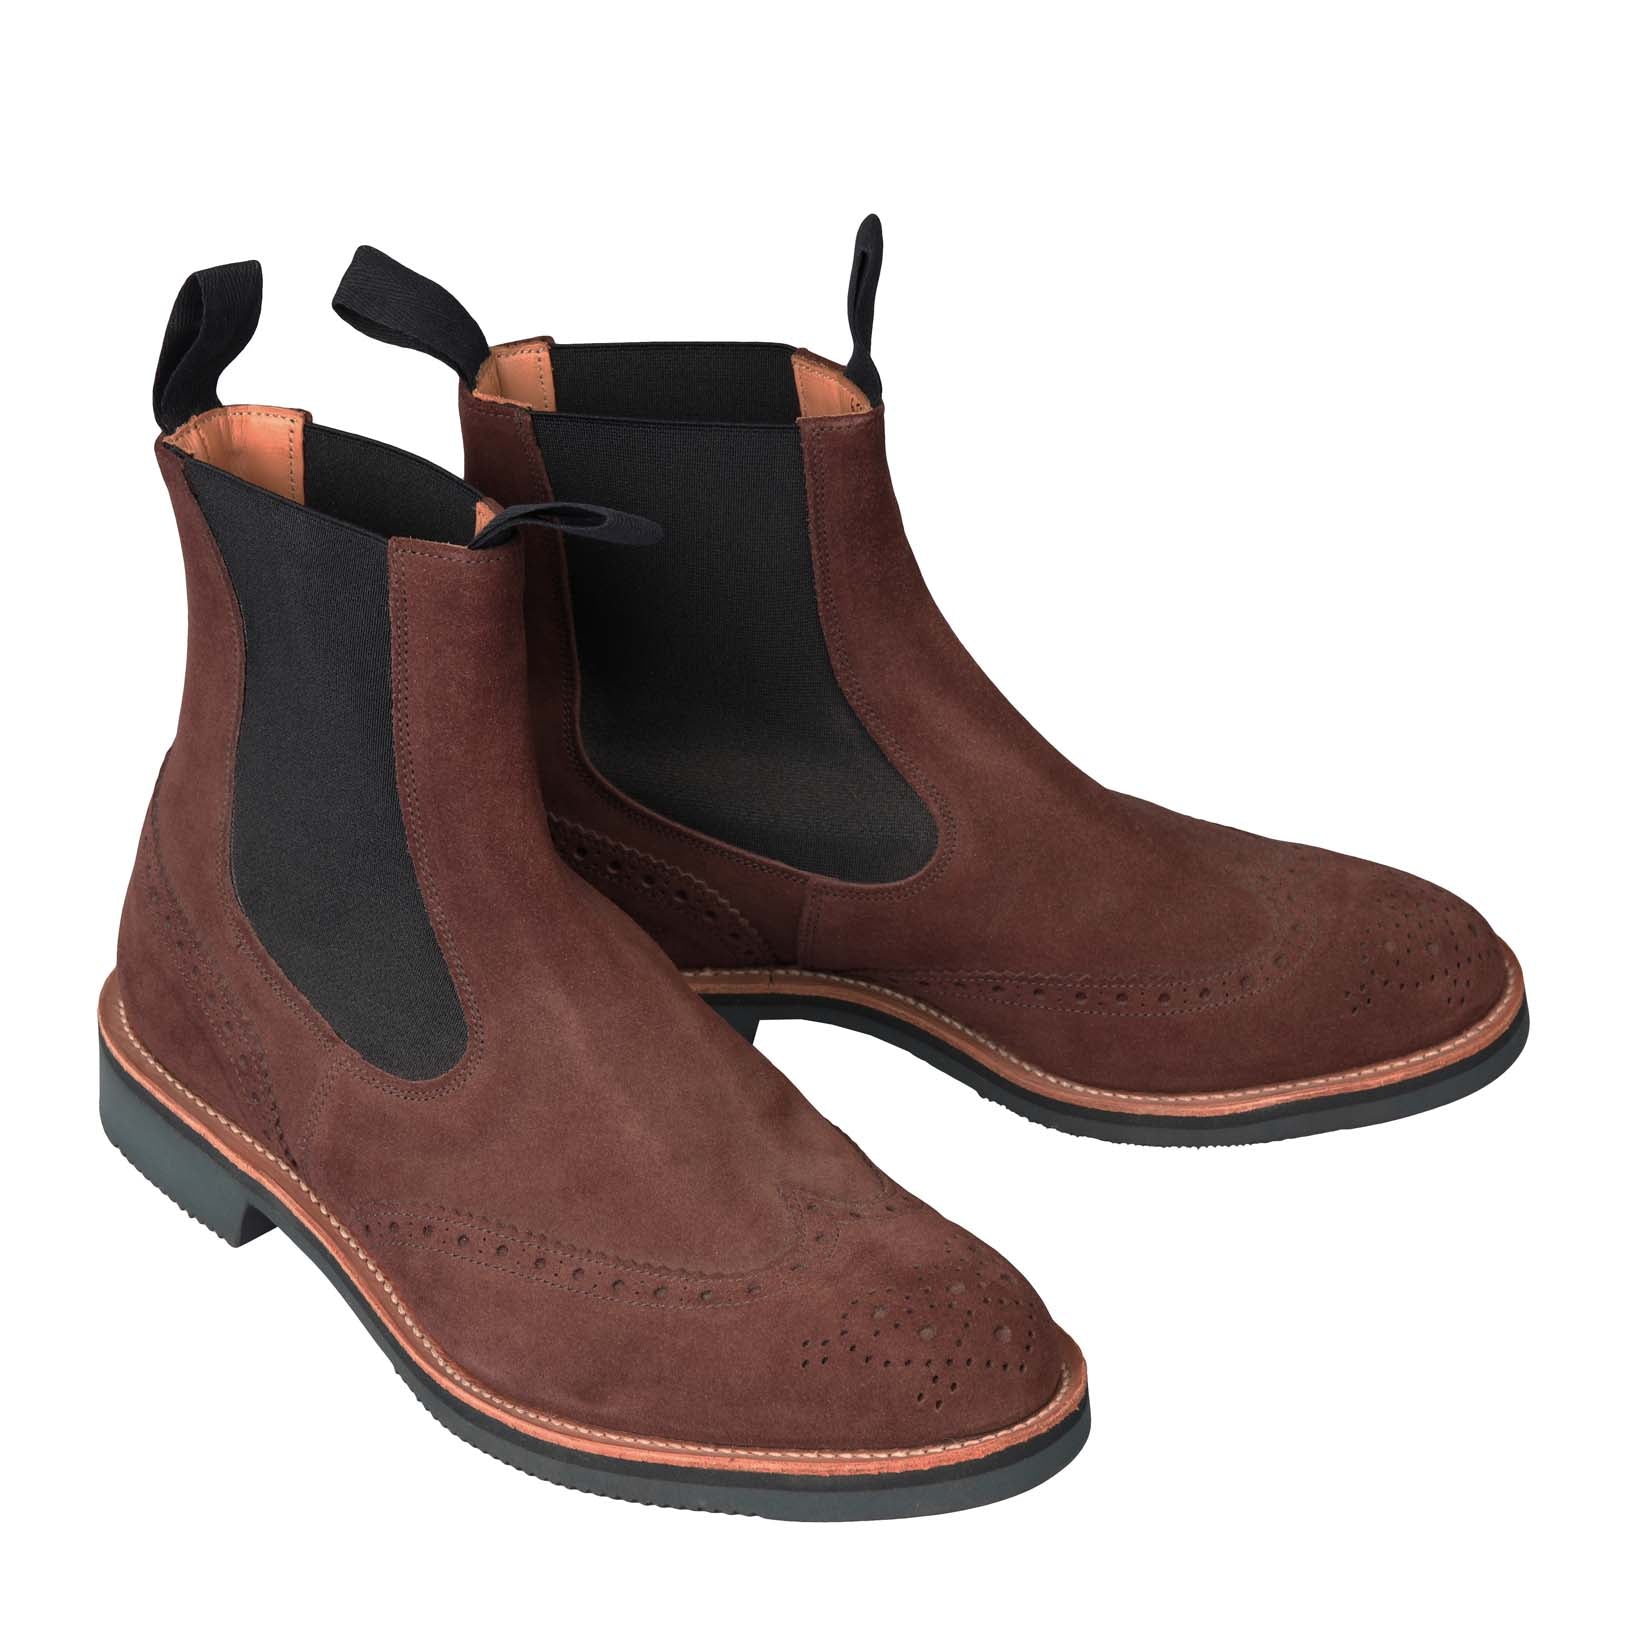 Elastic Sided Boots Burgundy Suede-Tricker's-Conrad Hasselbach Shoes & Garment